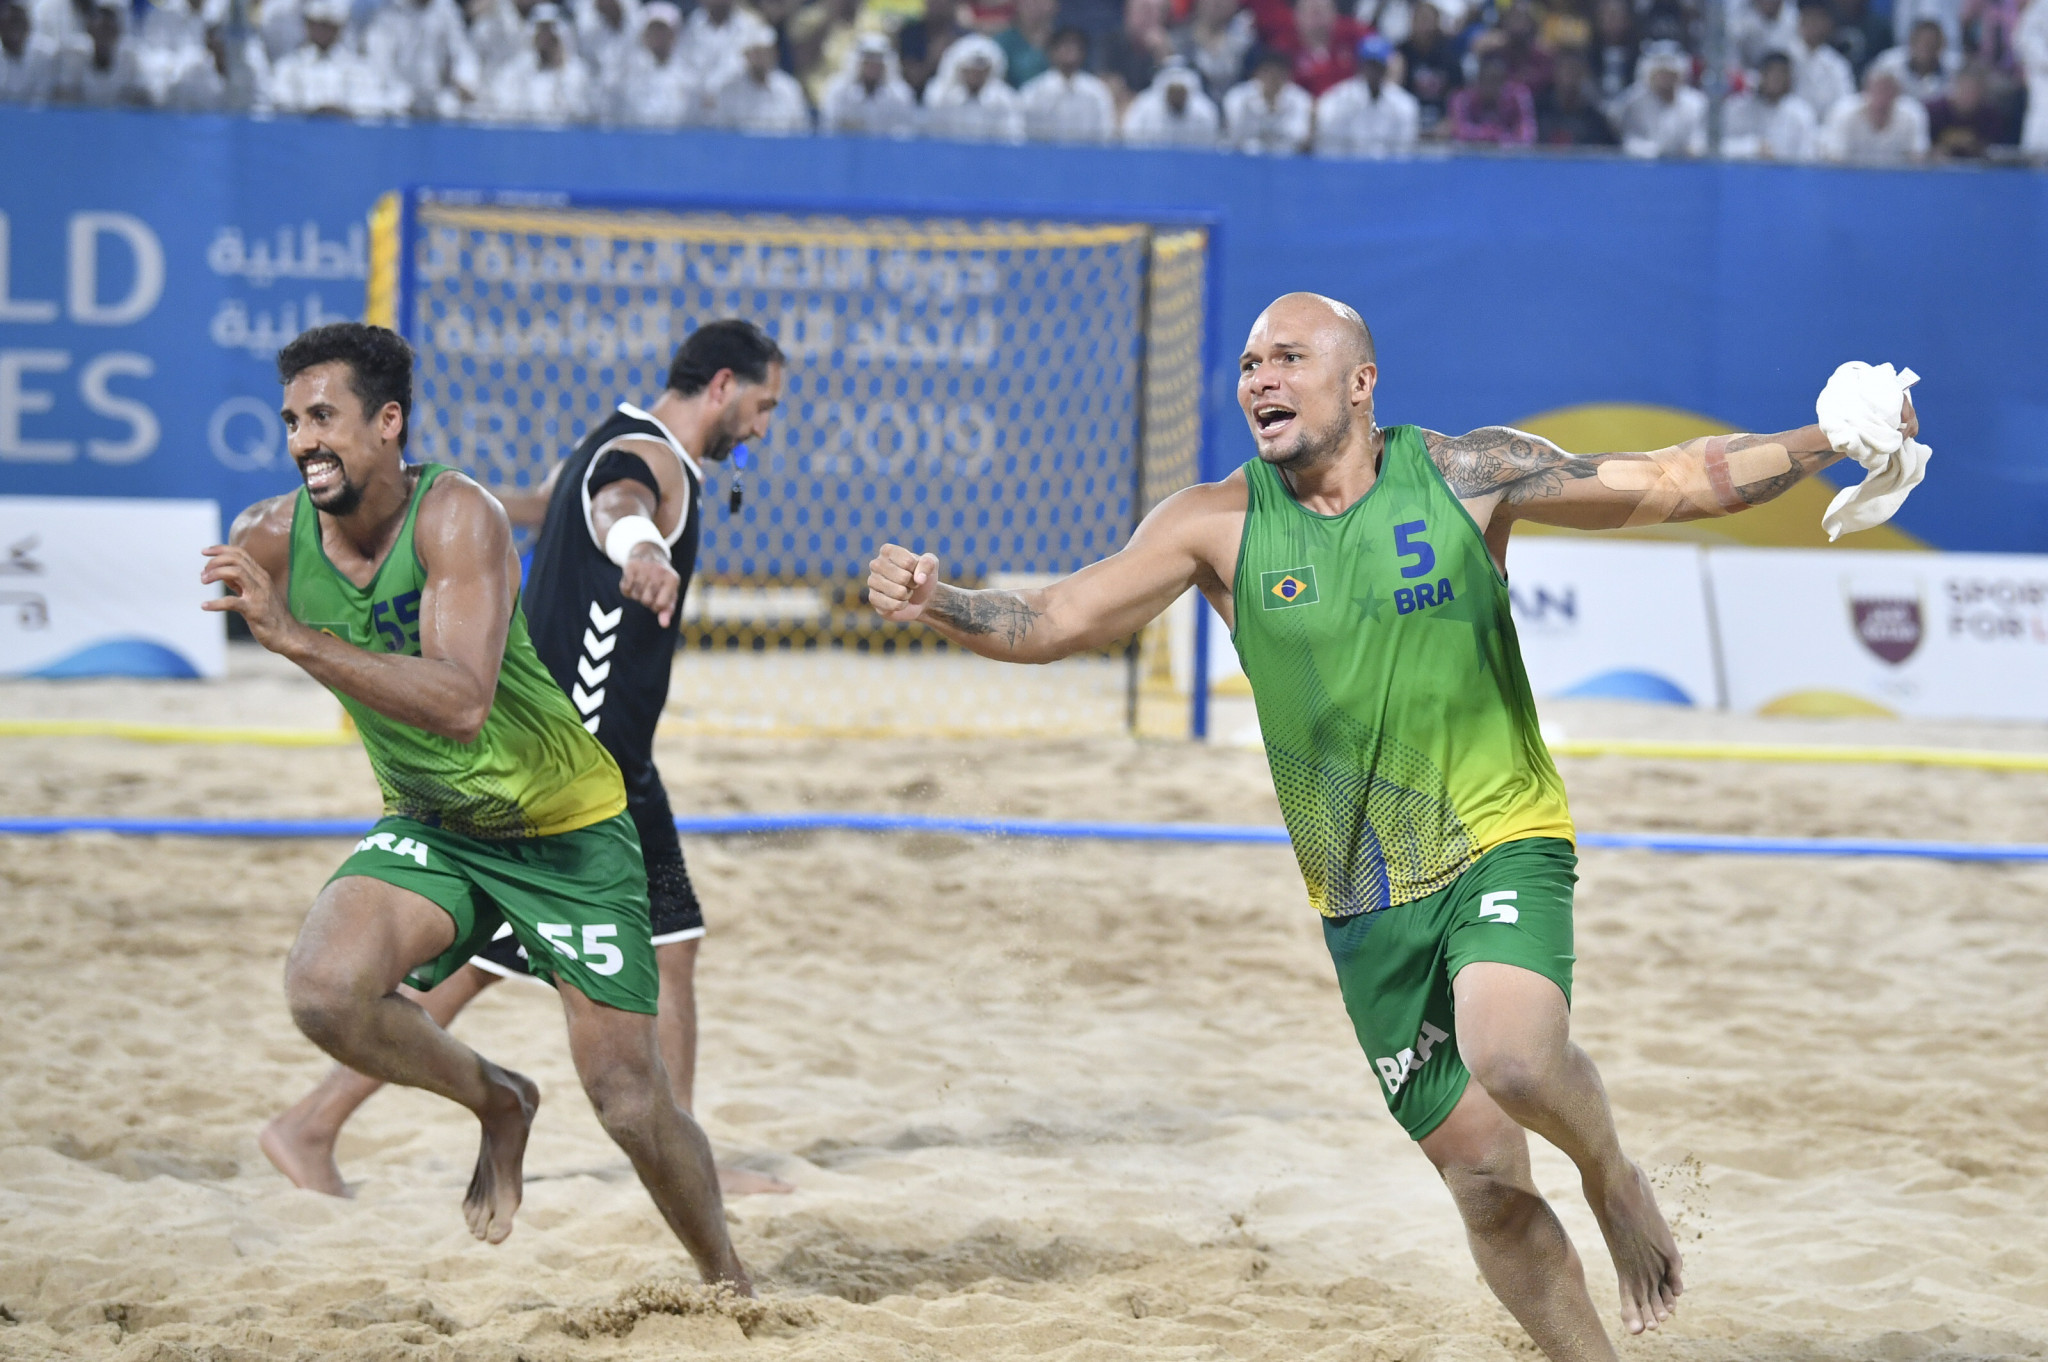 insidethegames is reporting LIVE from the ANOC World Beach World Games in Doha